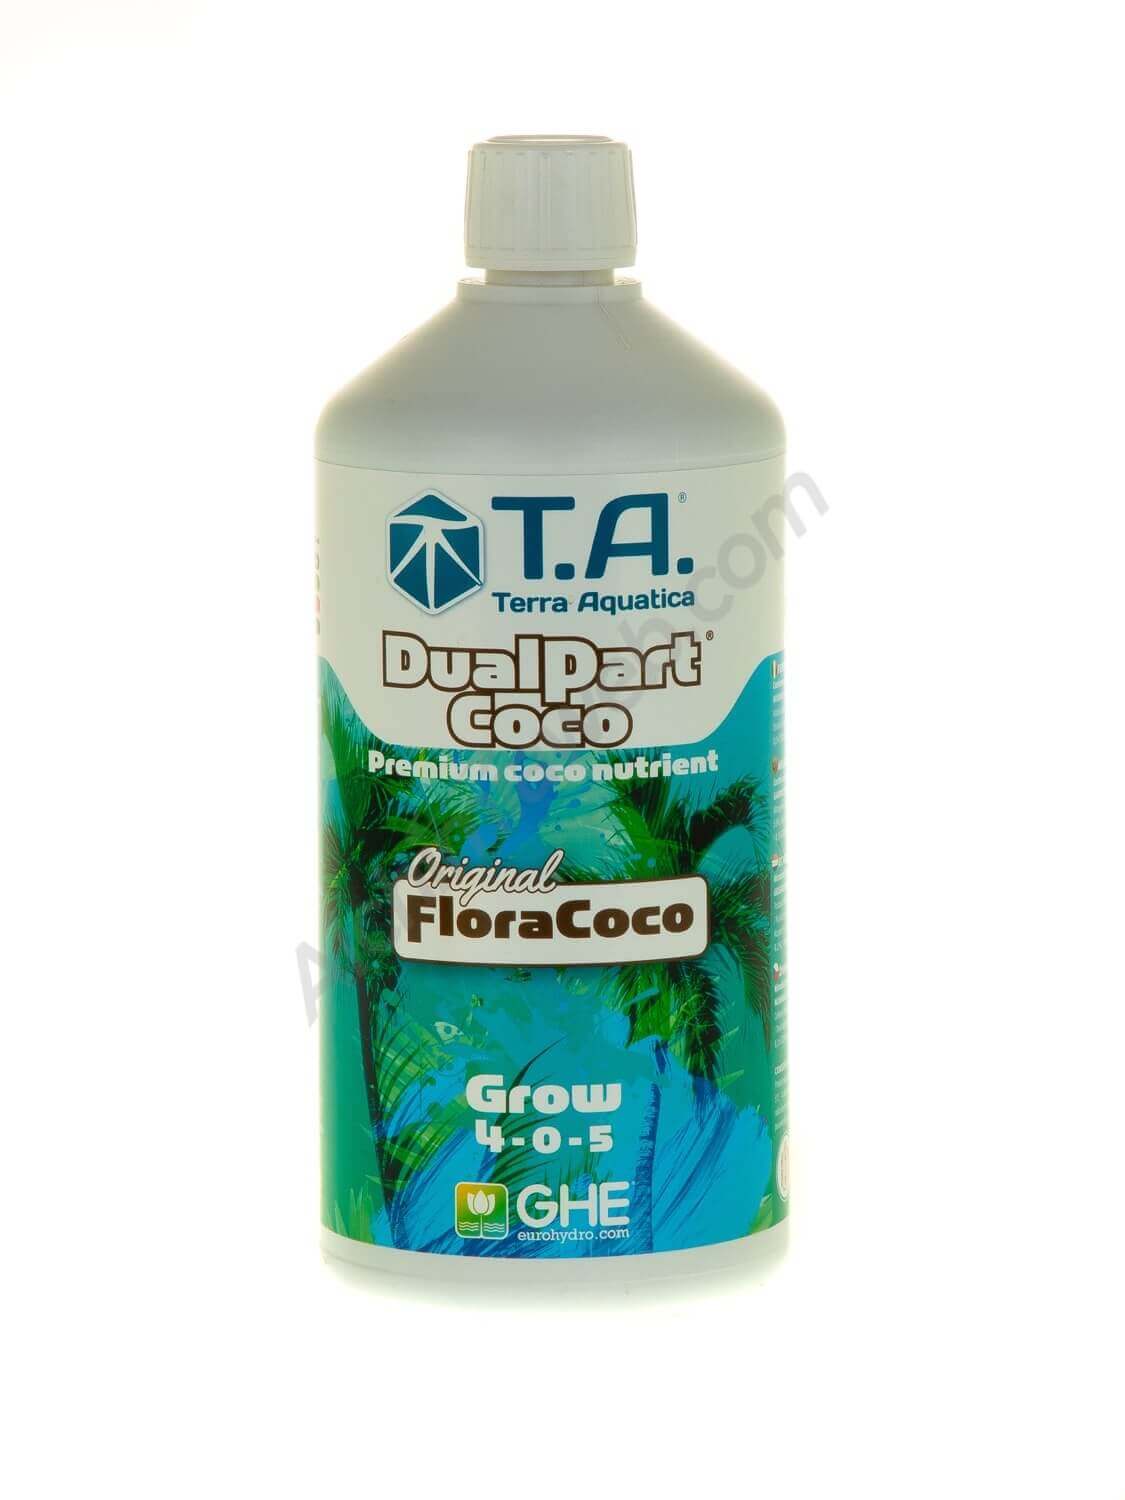 T.A. DualPart Coco Grow (formerly GHE's FloraCoco® Grow)